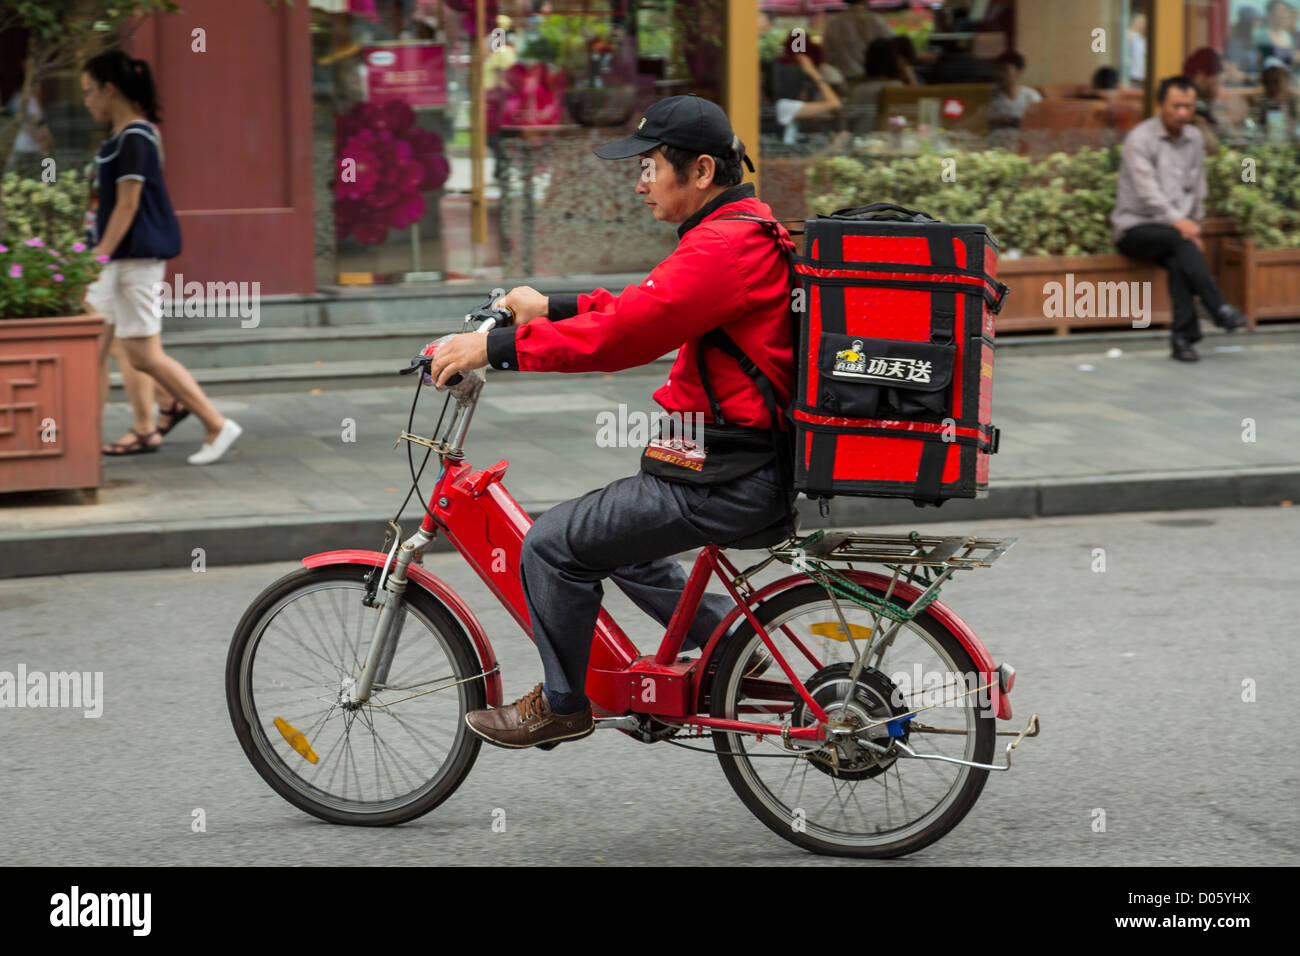 A scooter delivering Pizza Hut pizza Shanghai, China Stock Photo